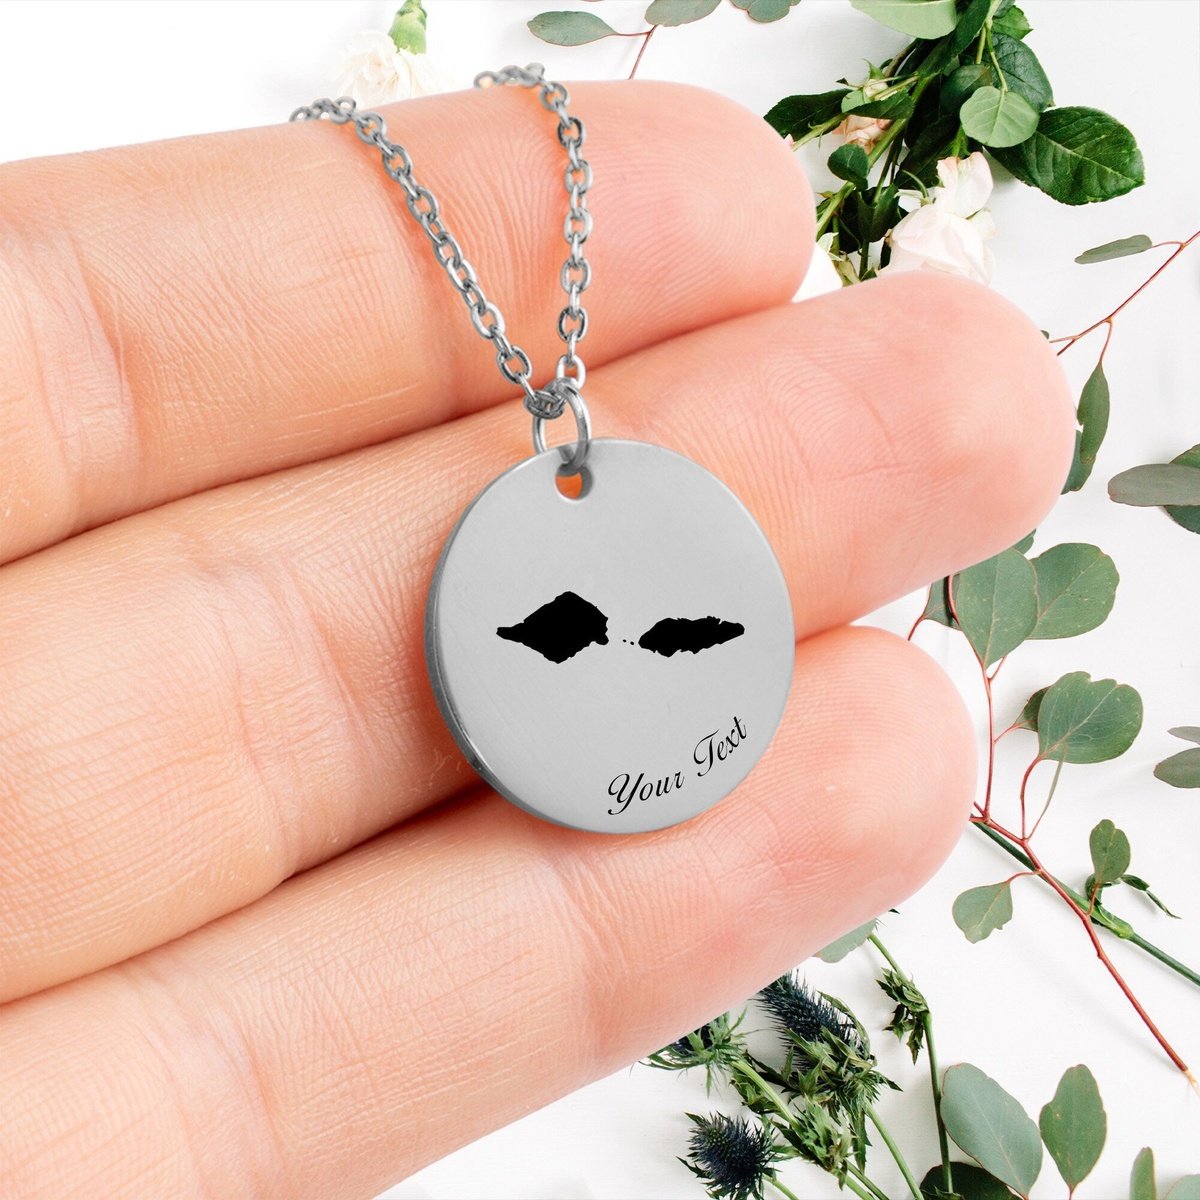 Samoa Country Map Necklace, Your Name Necklace, Minimalist Necklace, Personalized Gift, Silver Necklace, Gift For Him Her